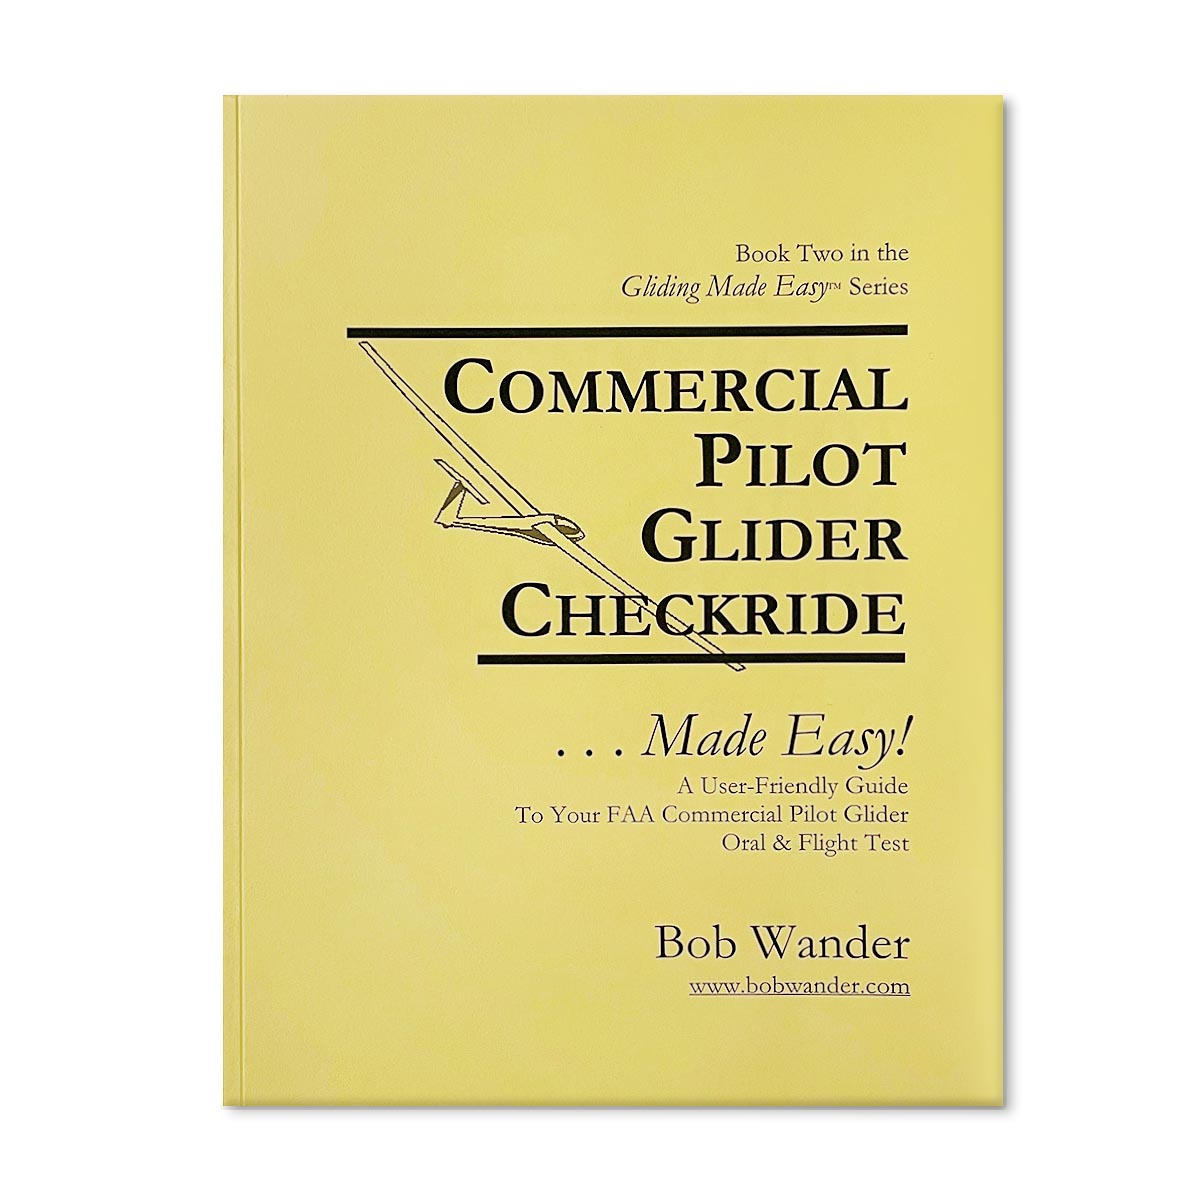 Commercial Pilot Glider Checkride Made Easy By Bob Wander commercial pilot glider